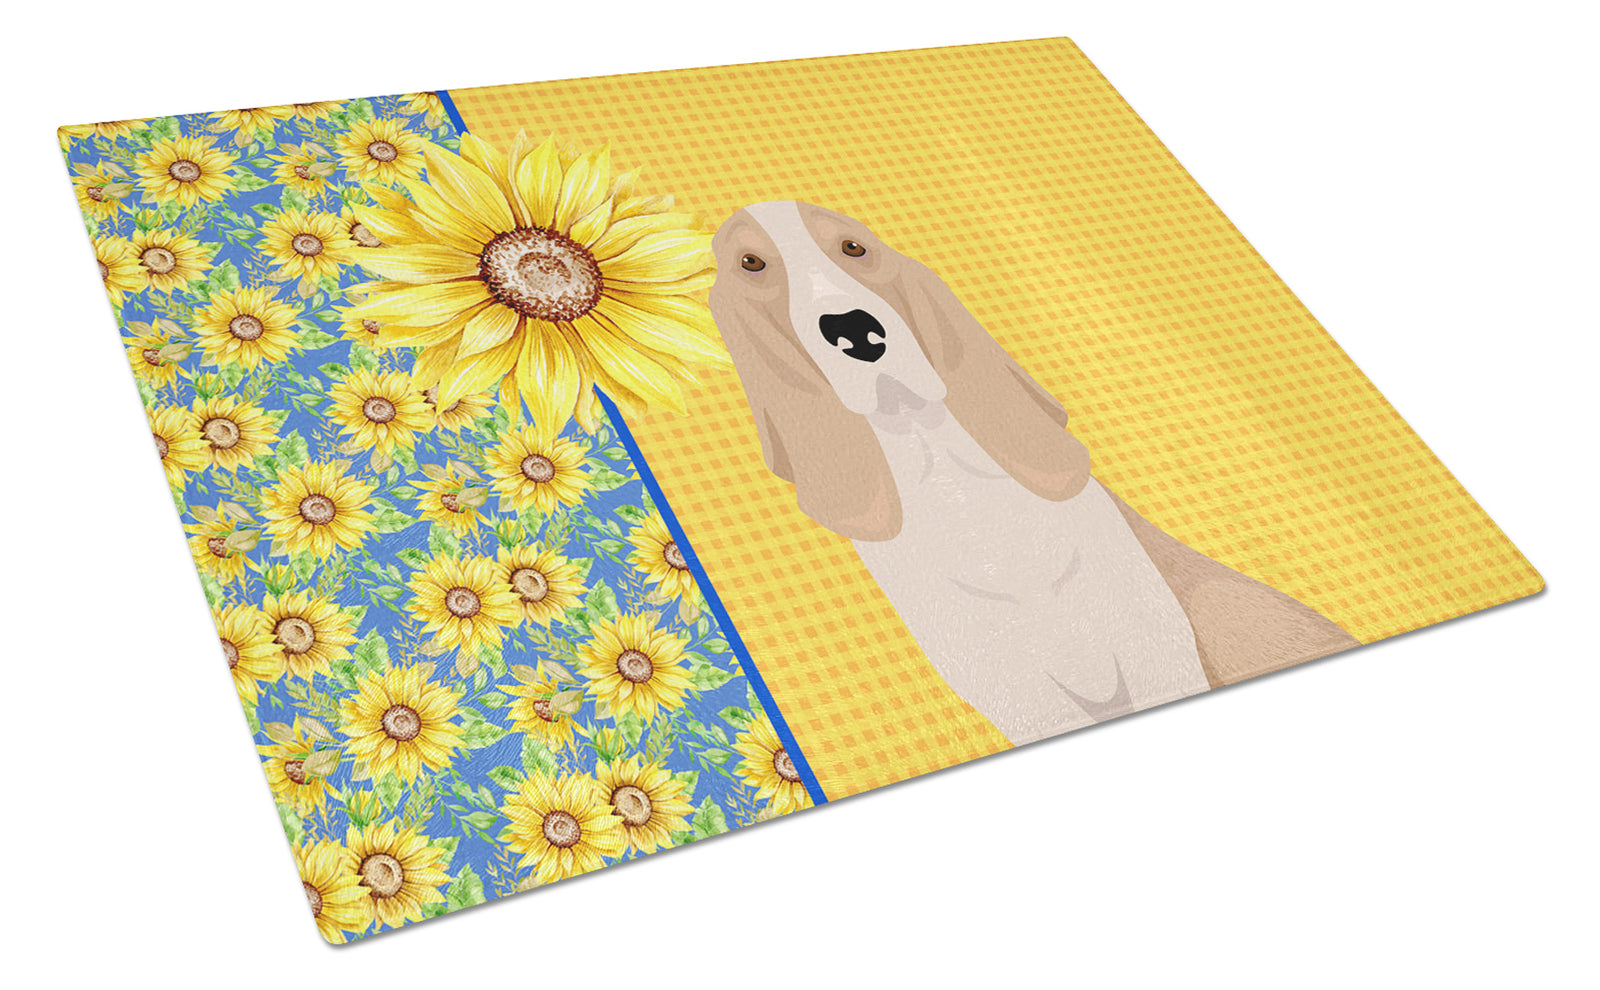 Buy this Summer Sunflowers Lemon and White Tricolor Basset Hound Glass Cutting Board Large